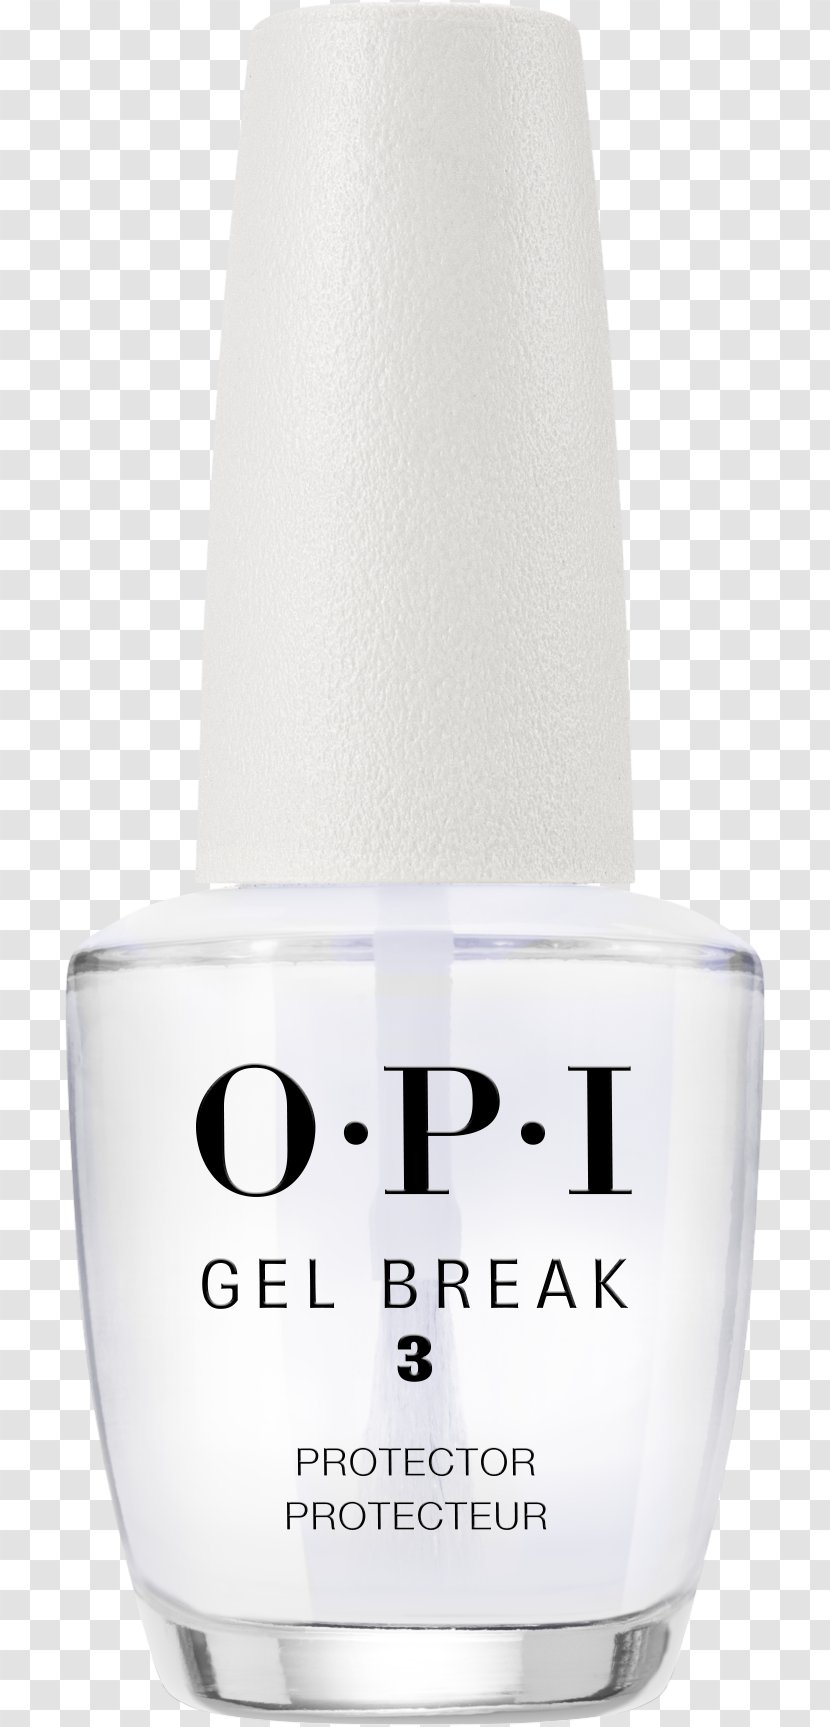 OPI Gel Break Trio Pack Products Color Nail Polish Lacquer - Milliliter Transparent PNG